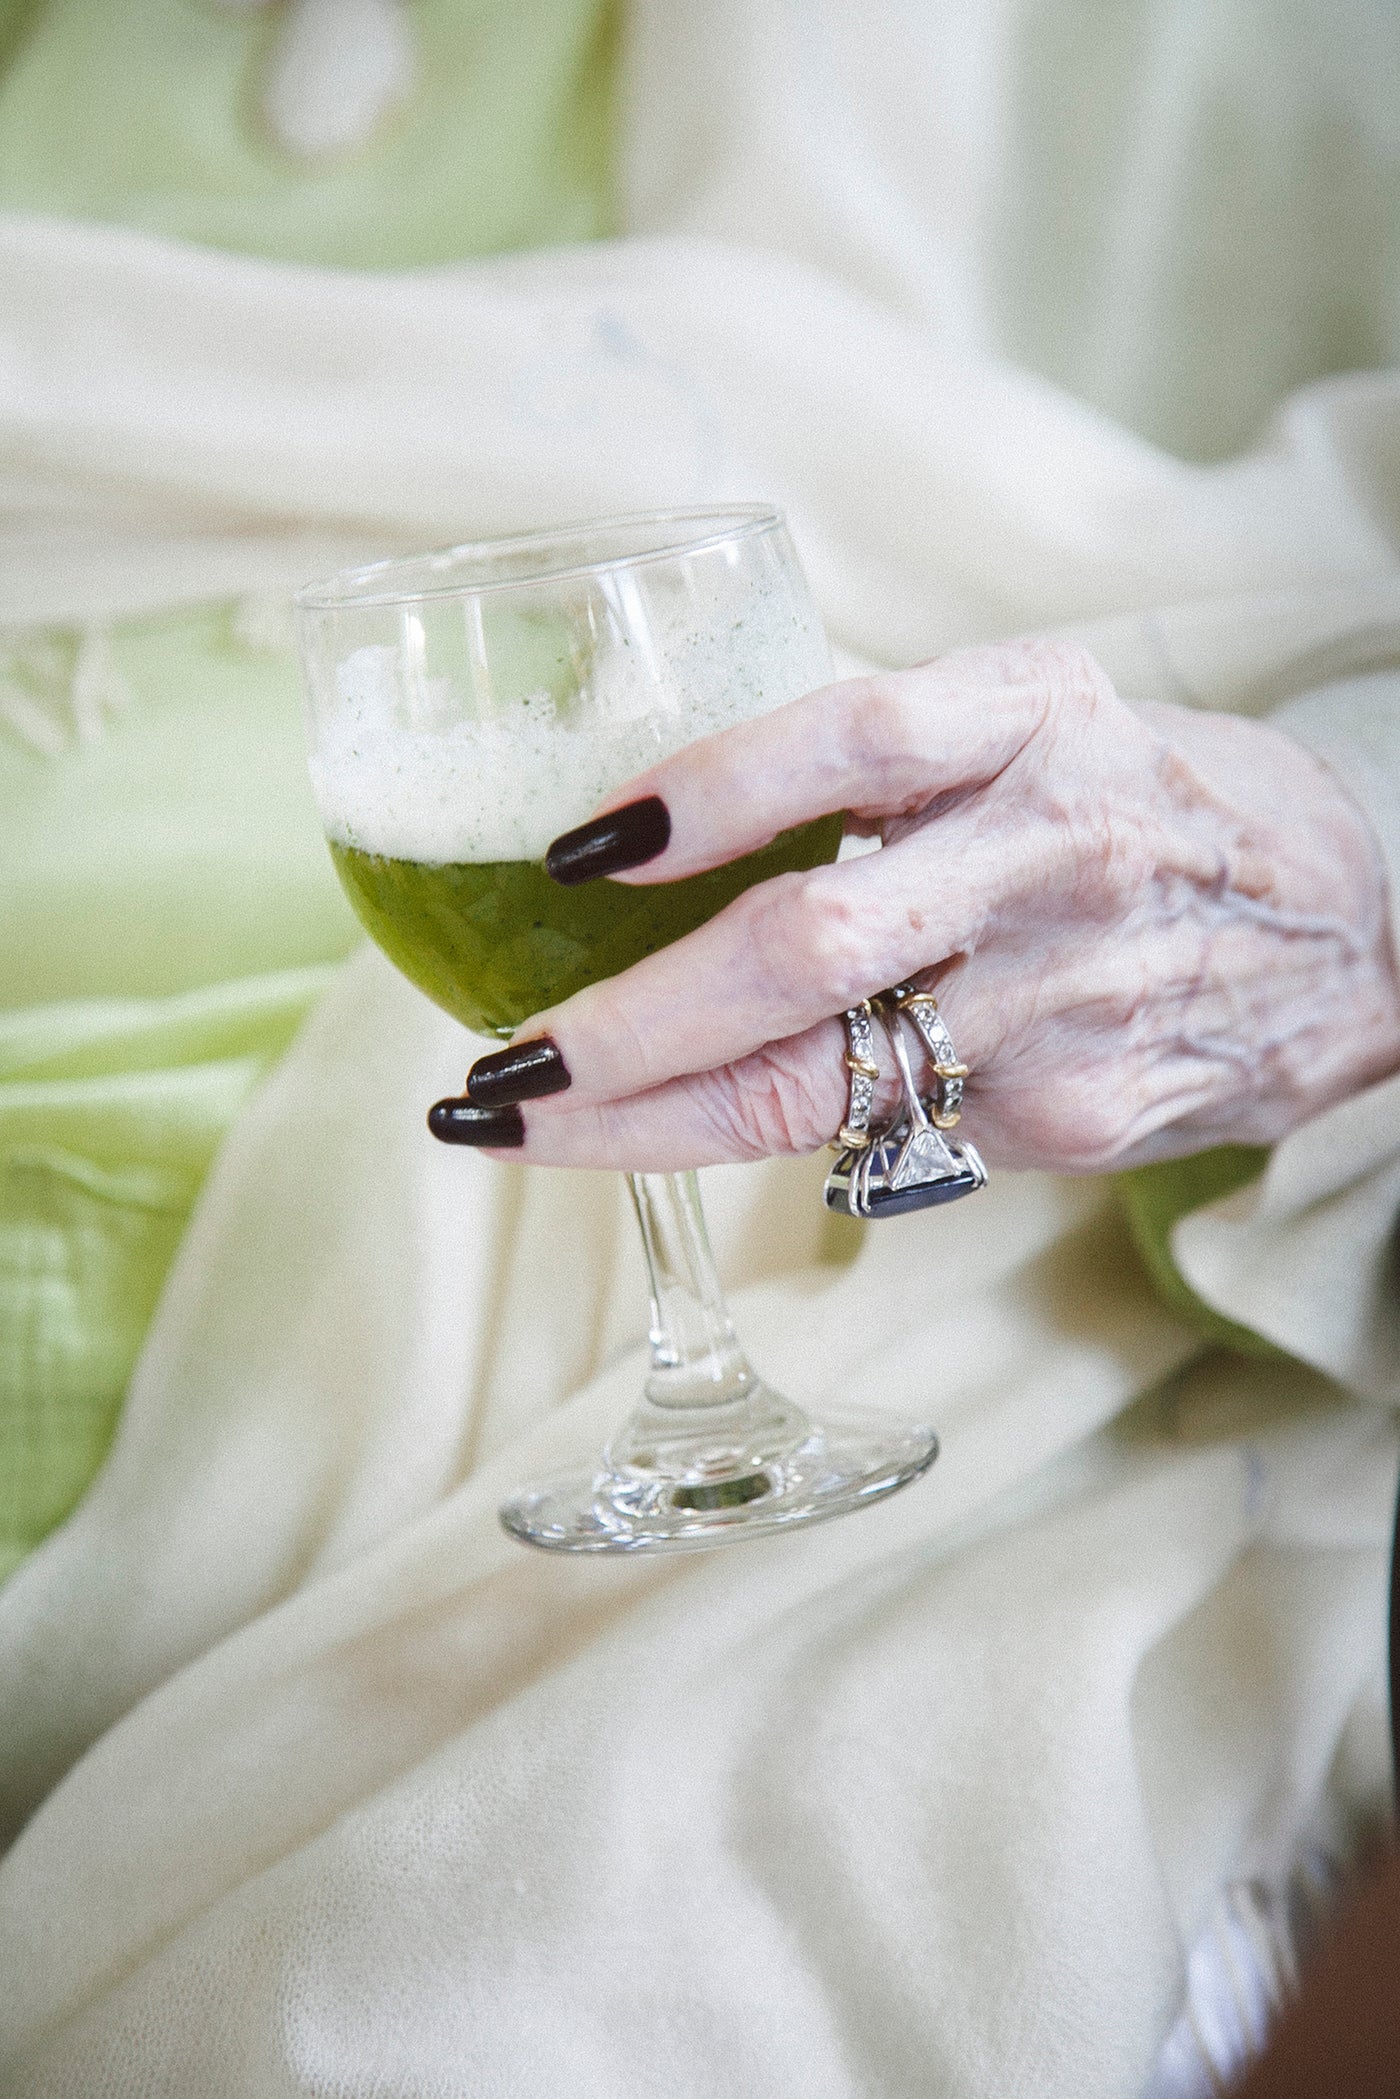 Grand dame hands with green cocktail juice. dramatic jewelry and lime green dress